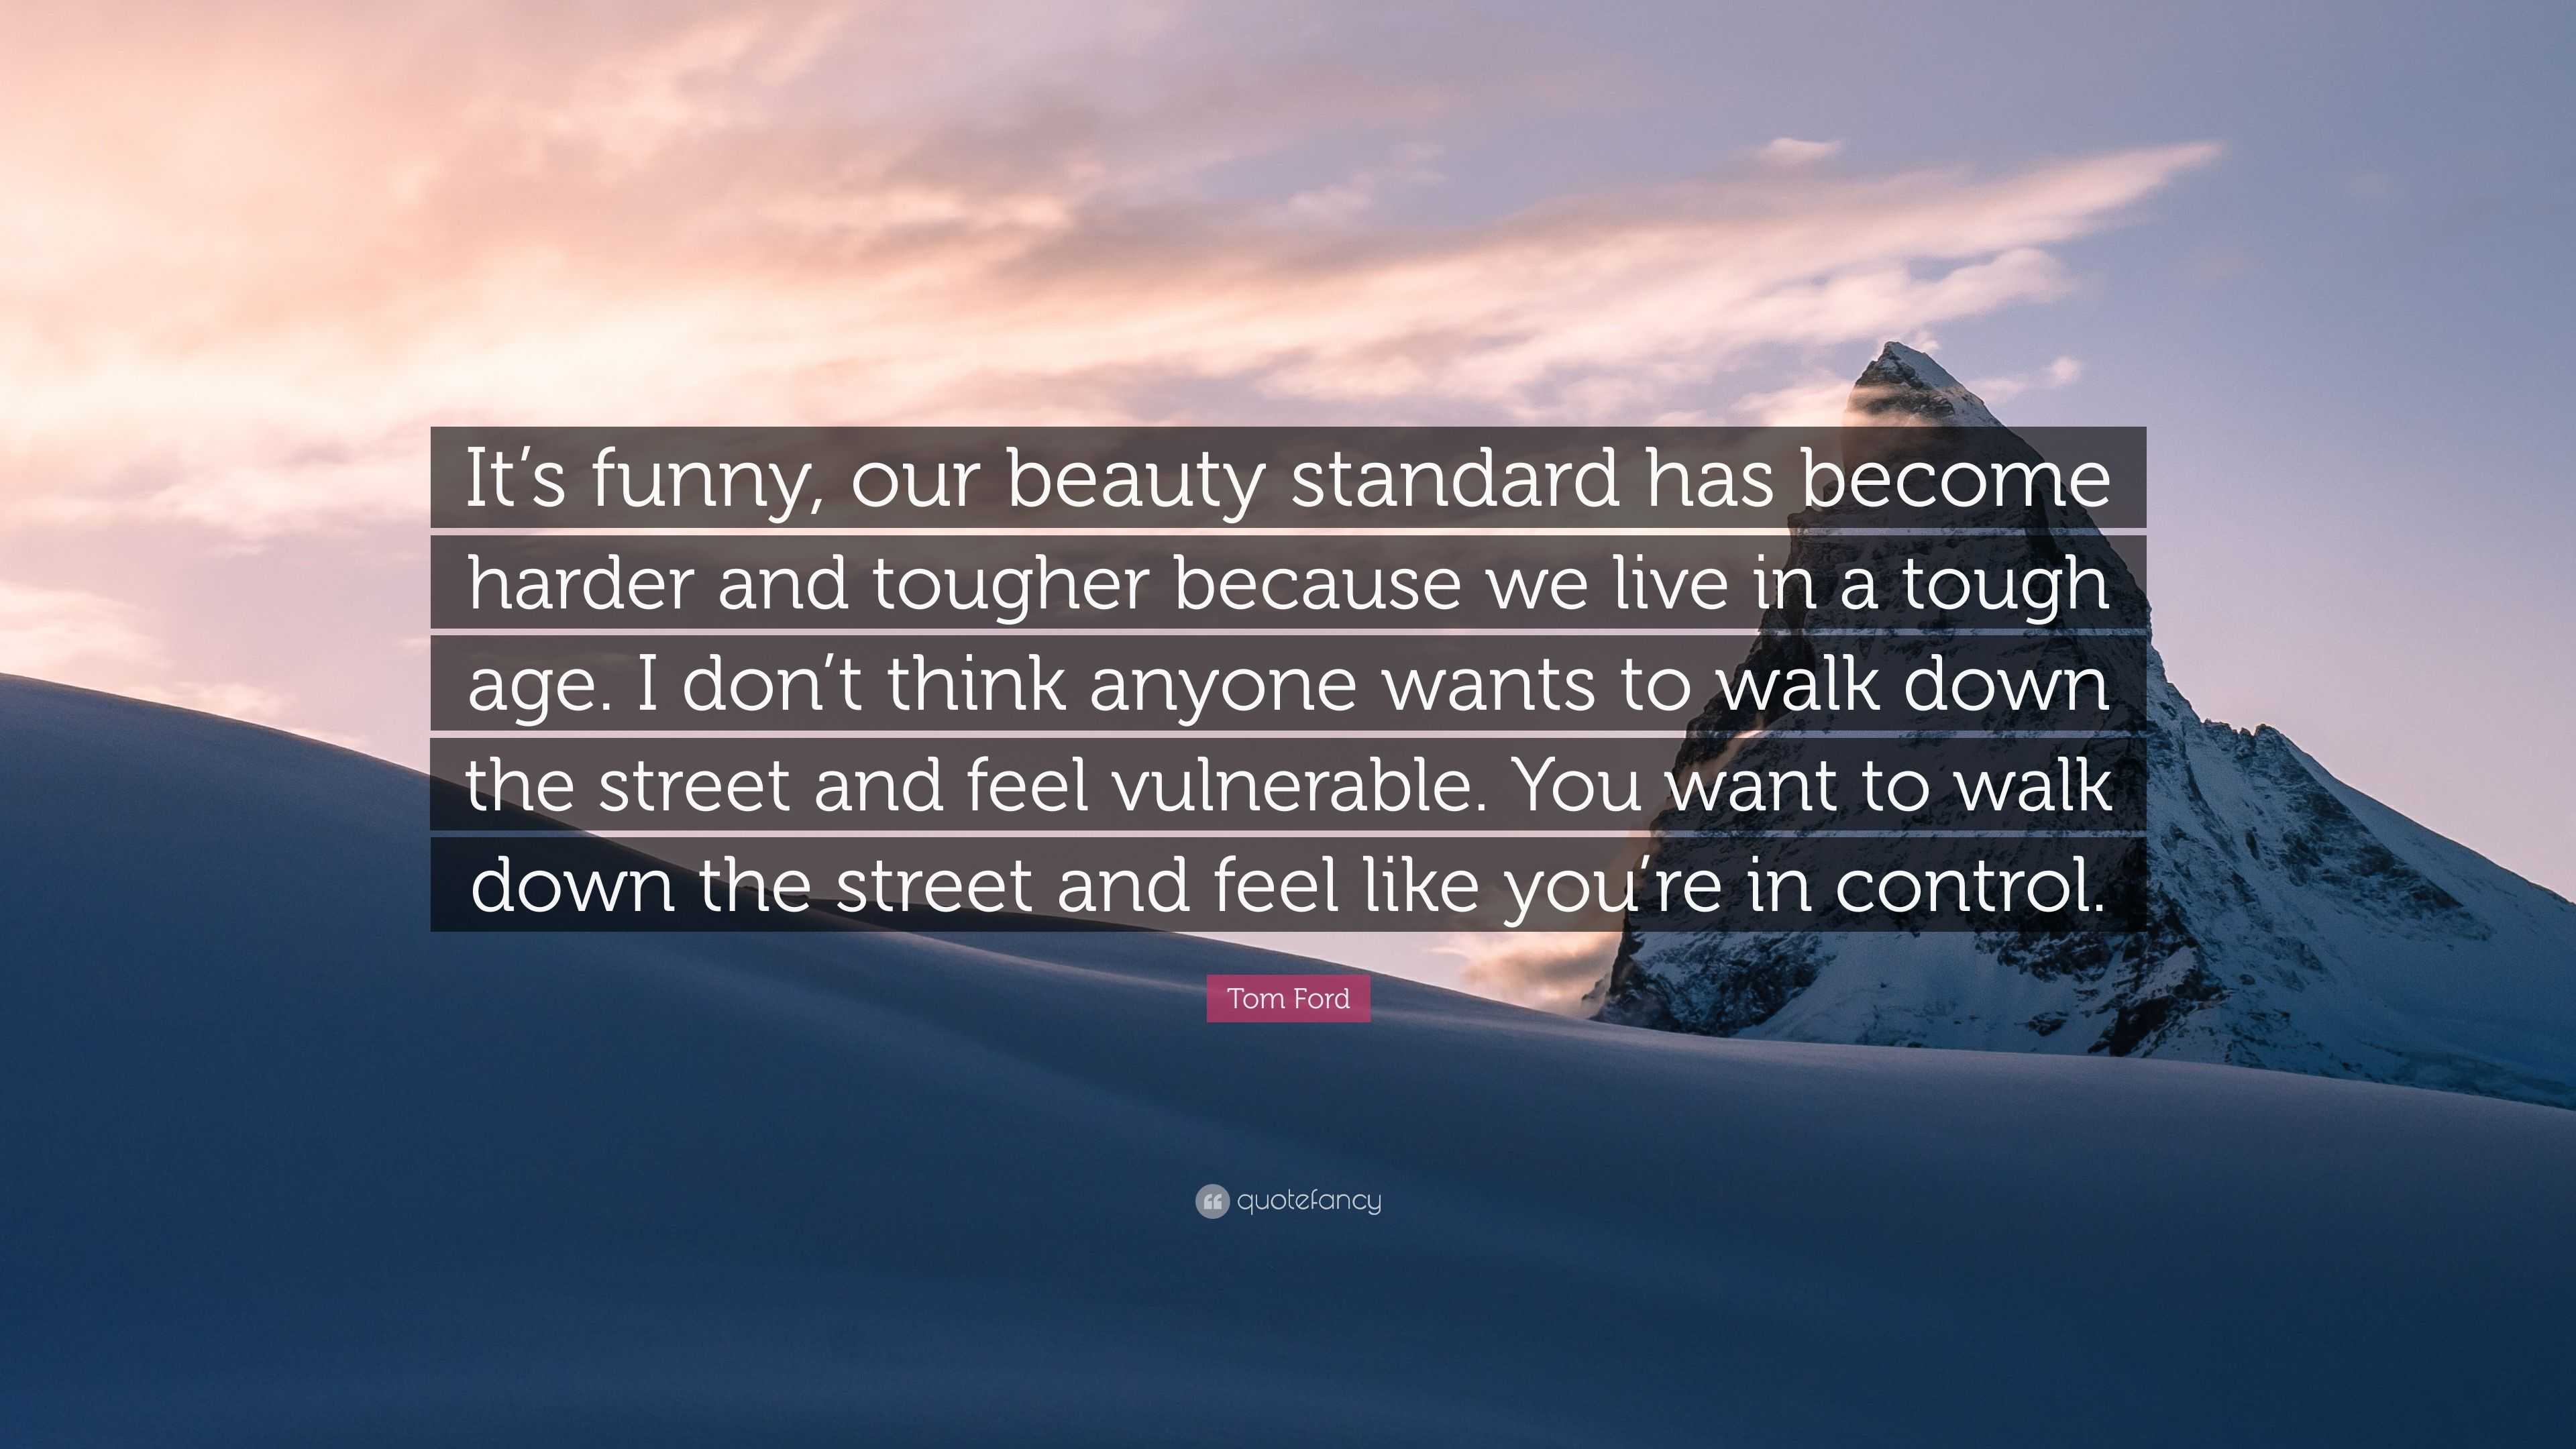 Tom Ford Quote: “It's funny, our beauty standard has become harder and  tougher because we live in a tough age. I don't think anyone wants...”